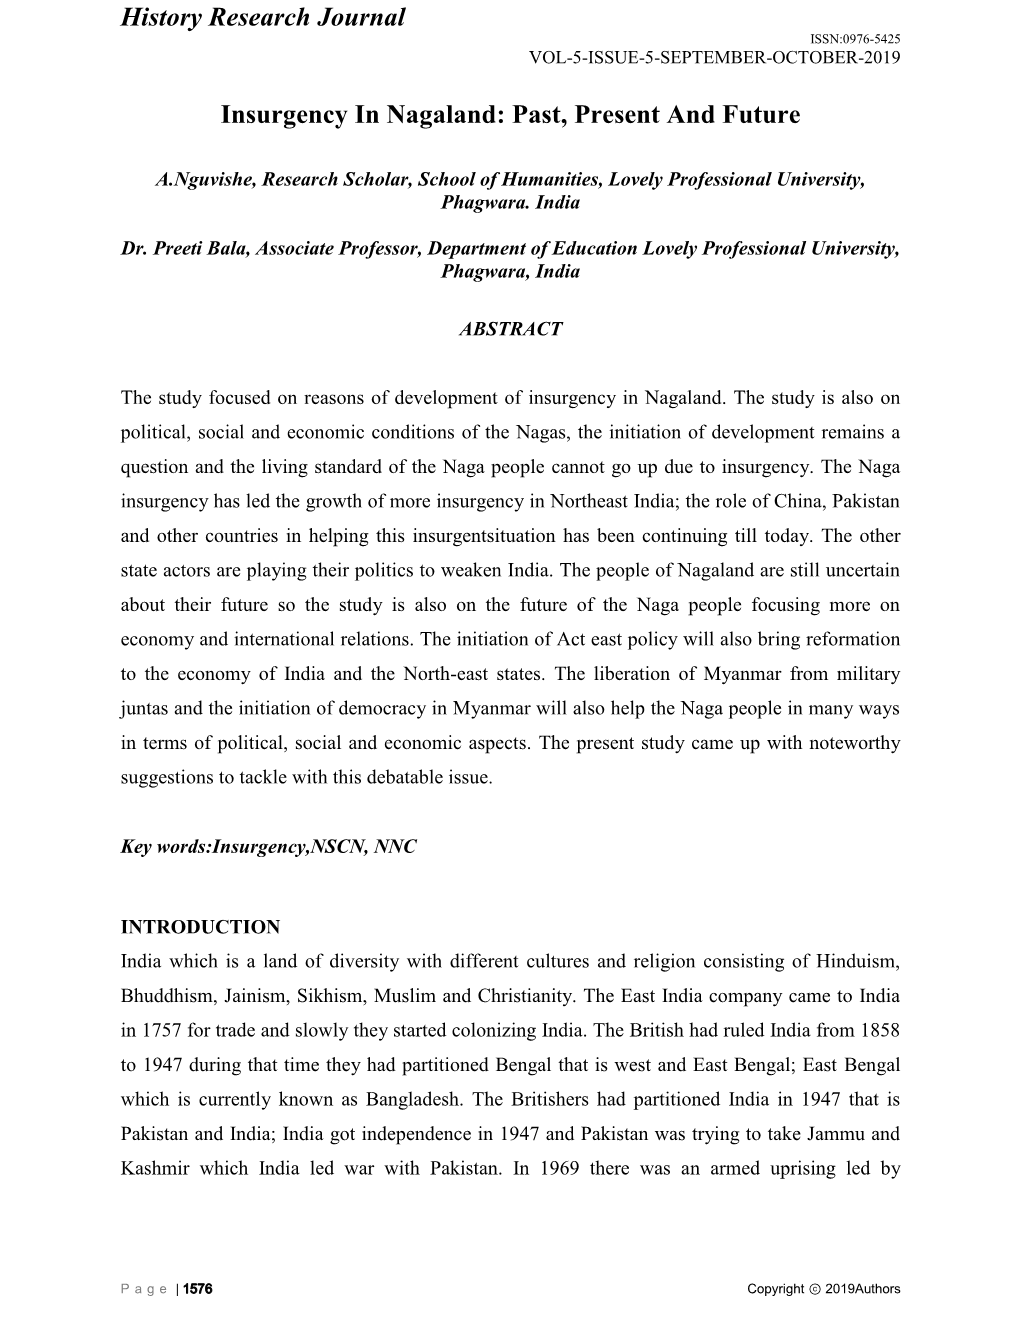 History Research Journal Insurgency in Nagaland: Past, Present And